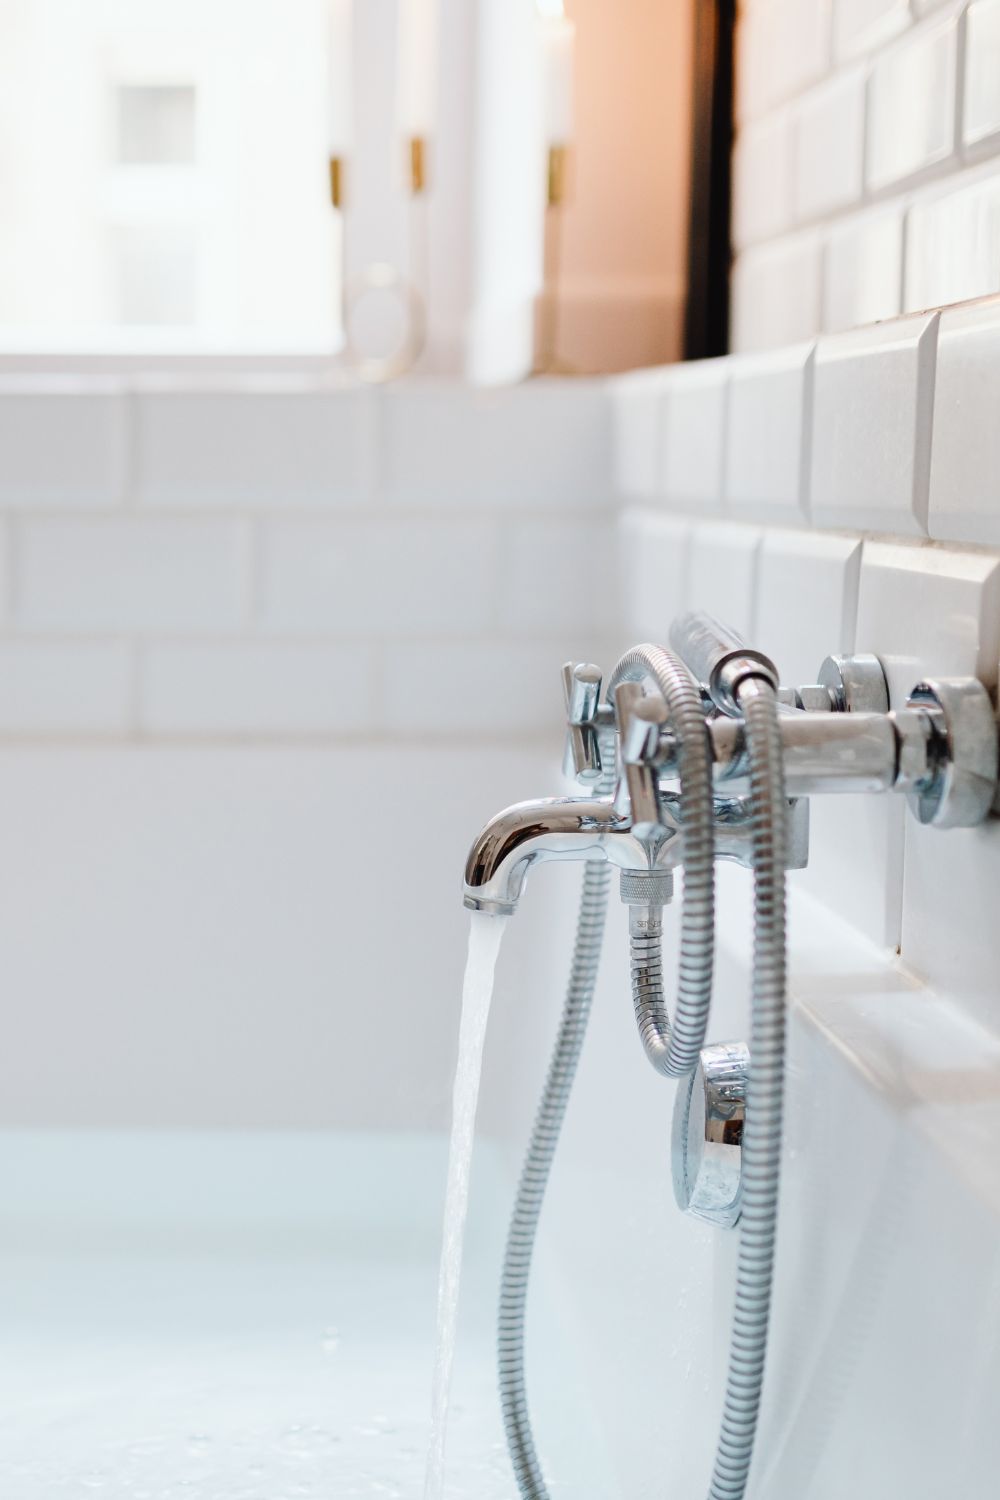 Common Plumbing Issues and How to Fix Them